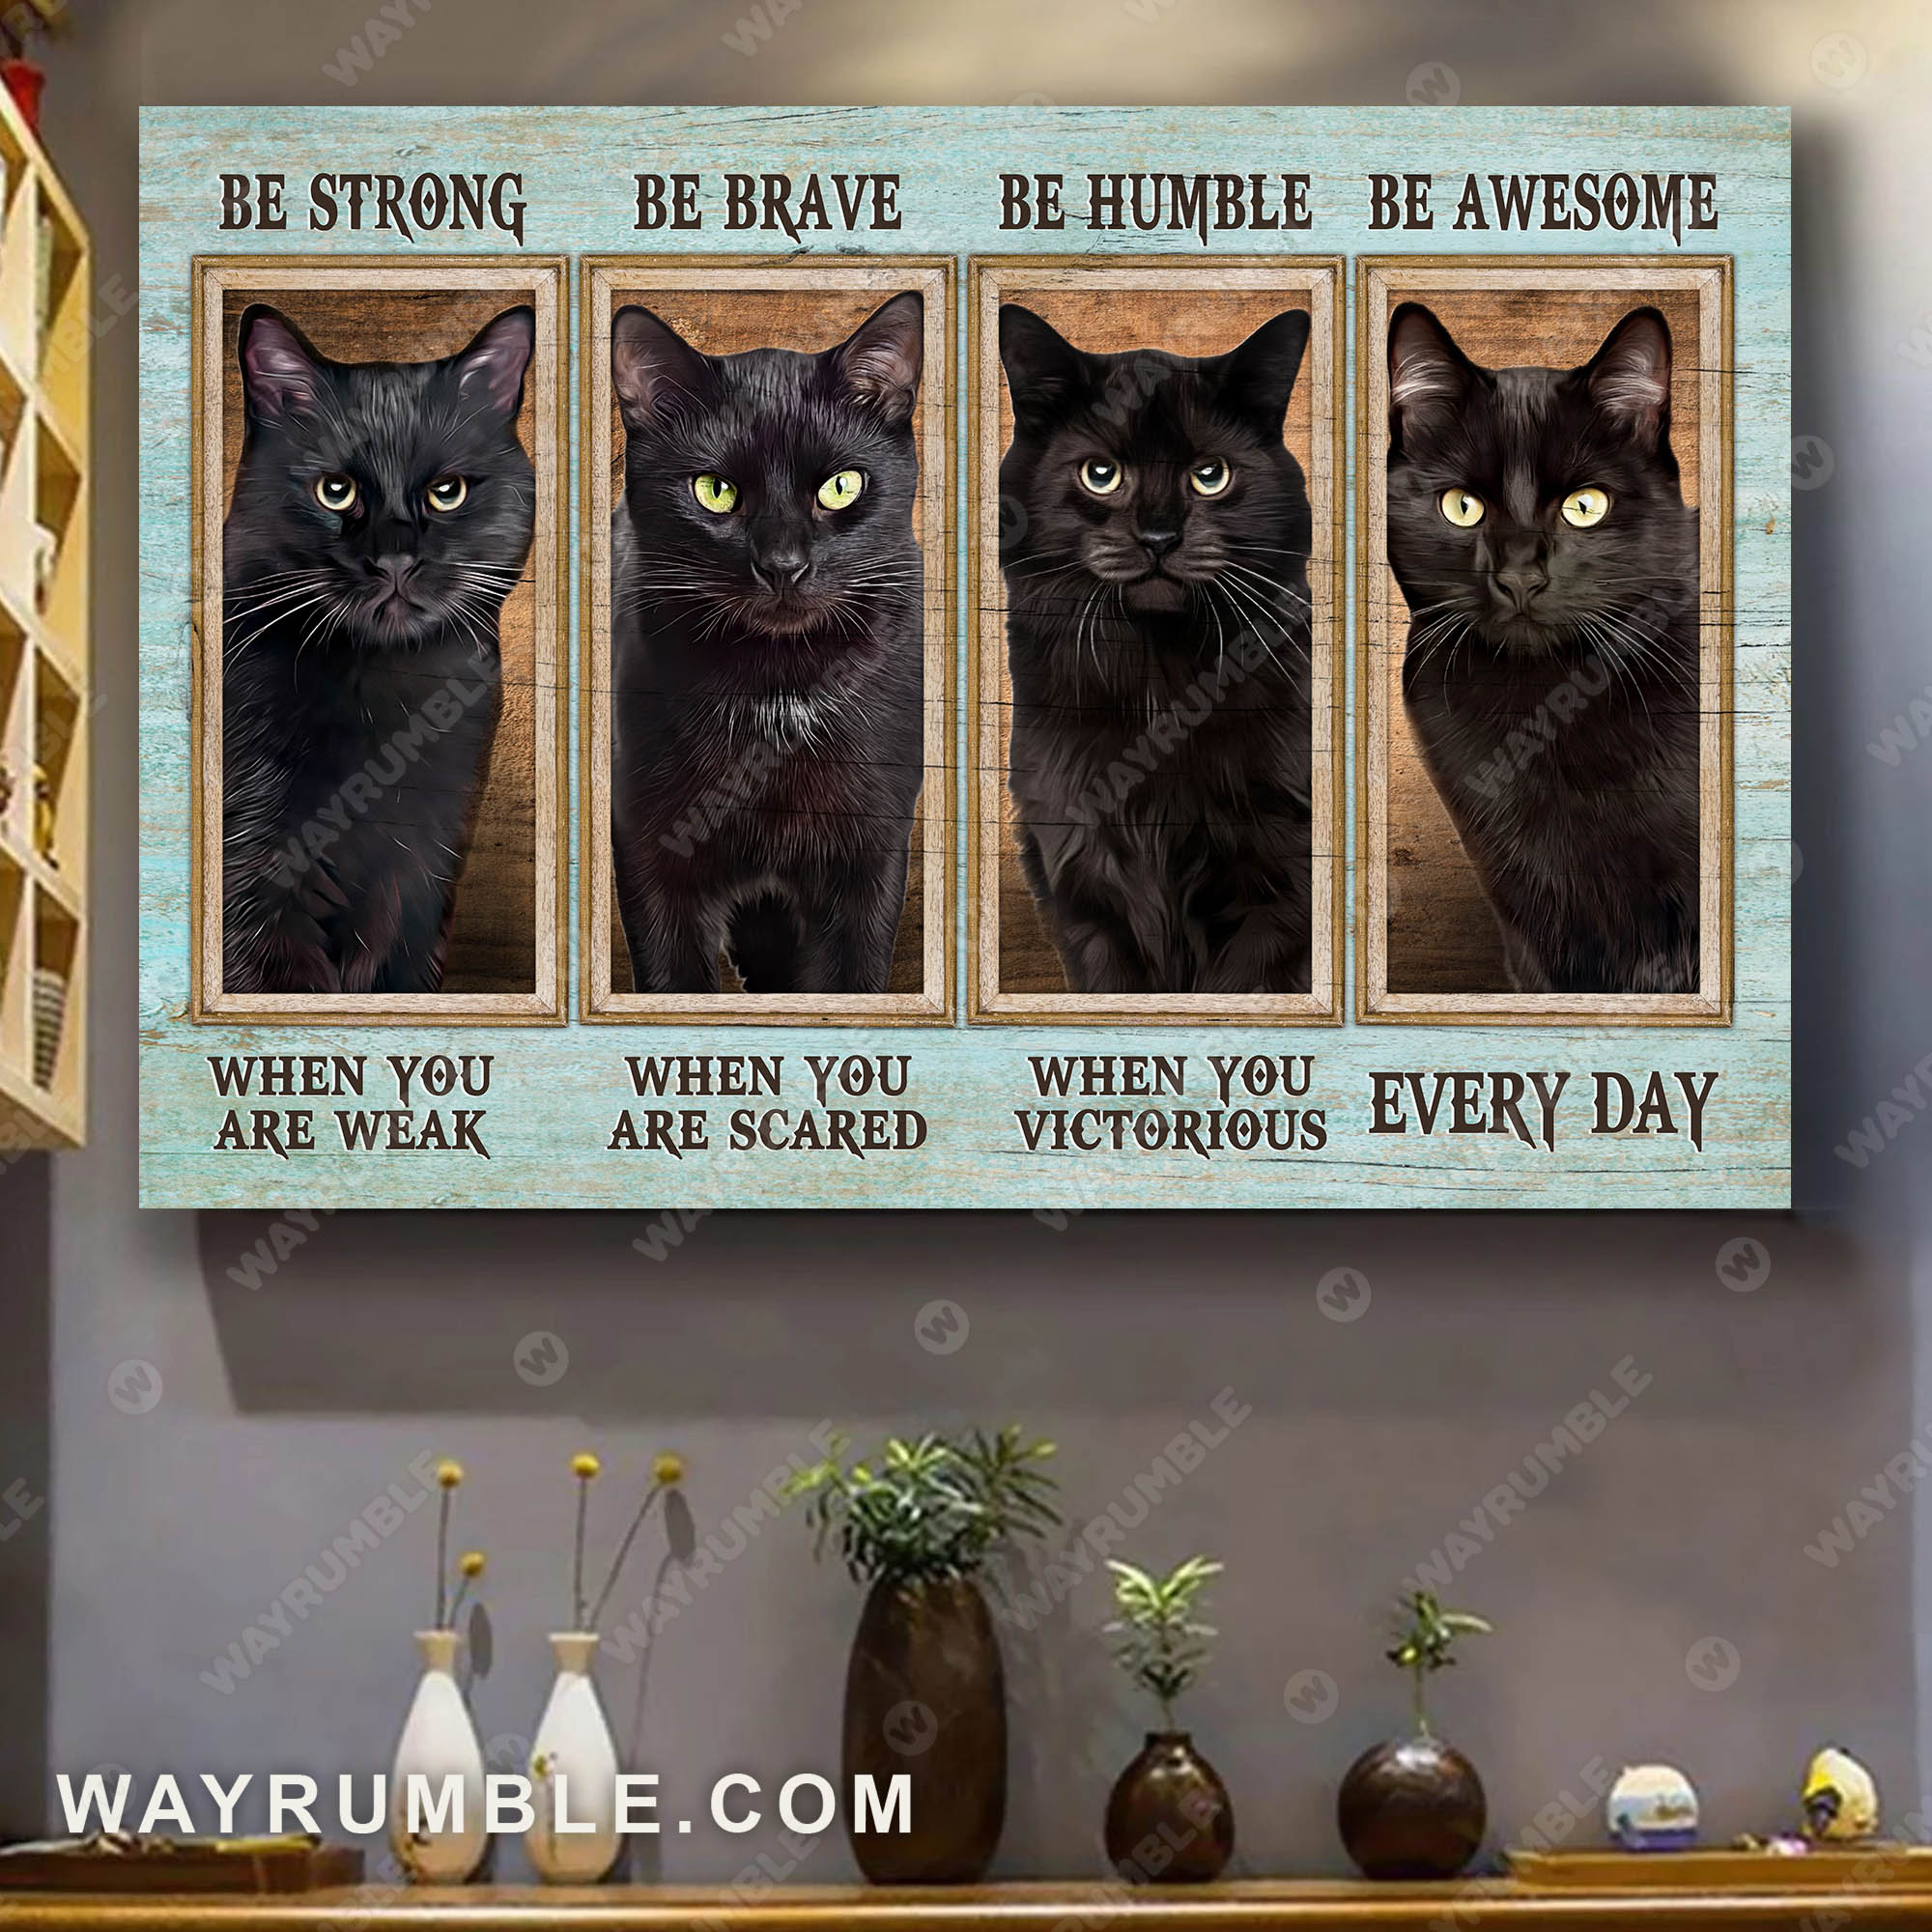 Black cat painting, Be awesome everyday - Jesus Landscape Canvas Prints, Wall Art